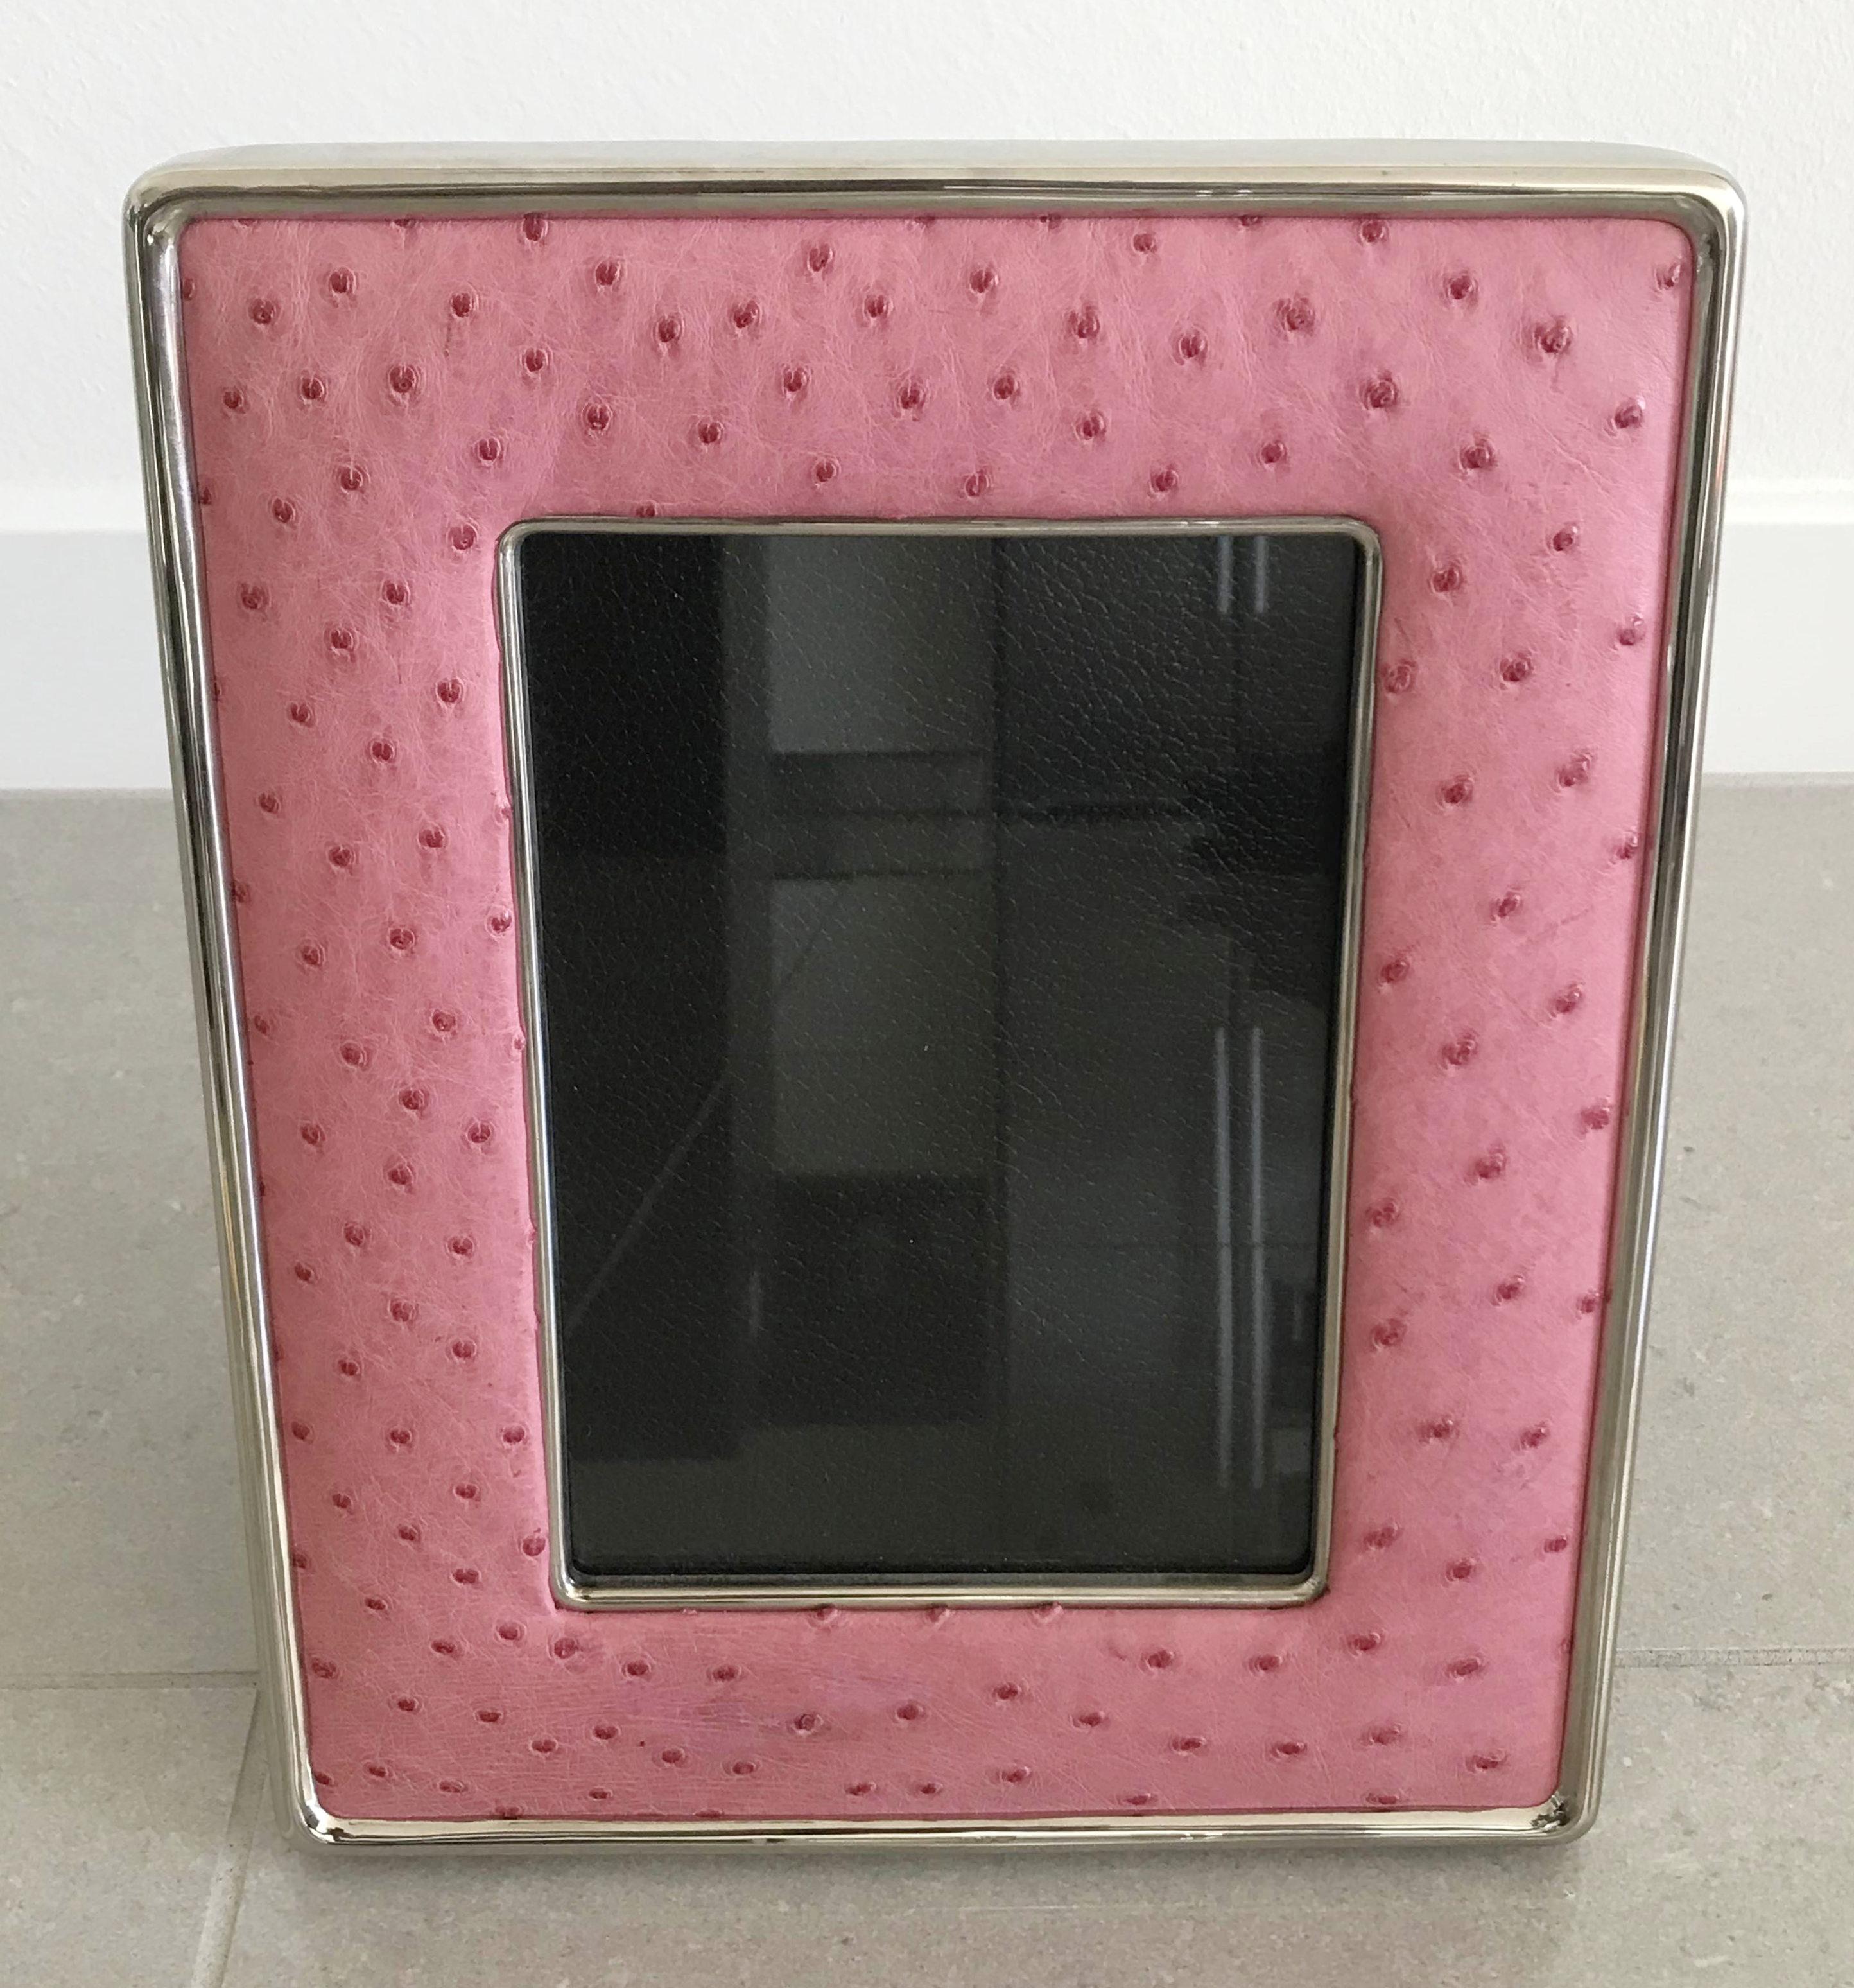 Pink ostrich leather and nickel-plated picture frame by Fabio Ltd
Measures: Height 10.5 inches, width 8.5 inches, depth 1 inch
Photo size 5 inches by 7 inches
LAST 1 in stock in Los Angeles
Order Reference #: FABIOLTD PF56
This piece makes for great